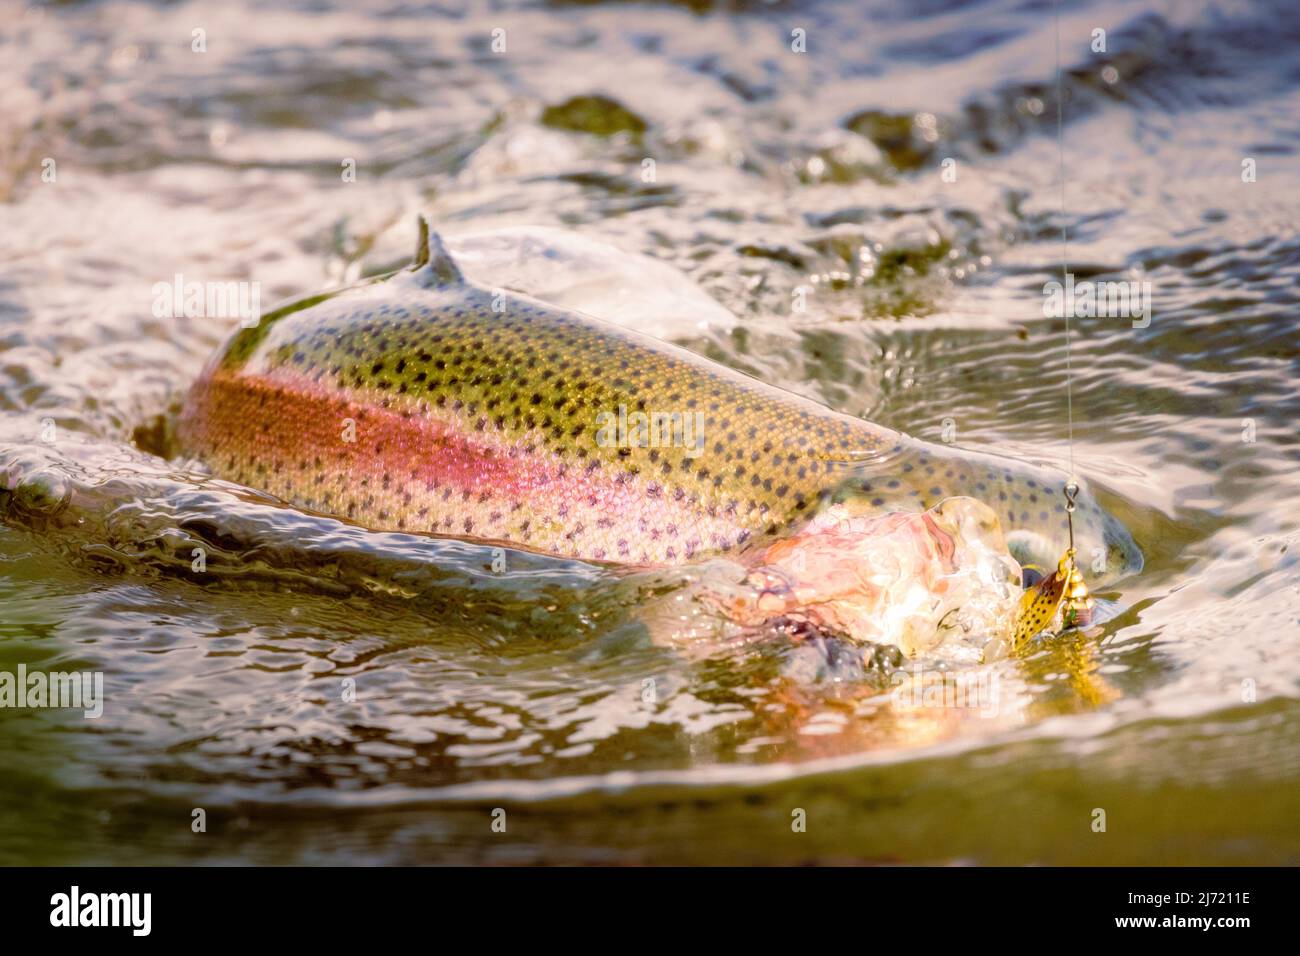 Rainbow trout (Oncorhynchus mykiss) fighting with a lure in its mouth.  Photographed in Shasta County, California, USA and processed to a dreamy look. Stock Photo